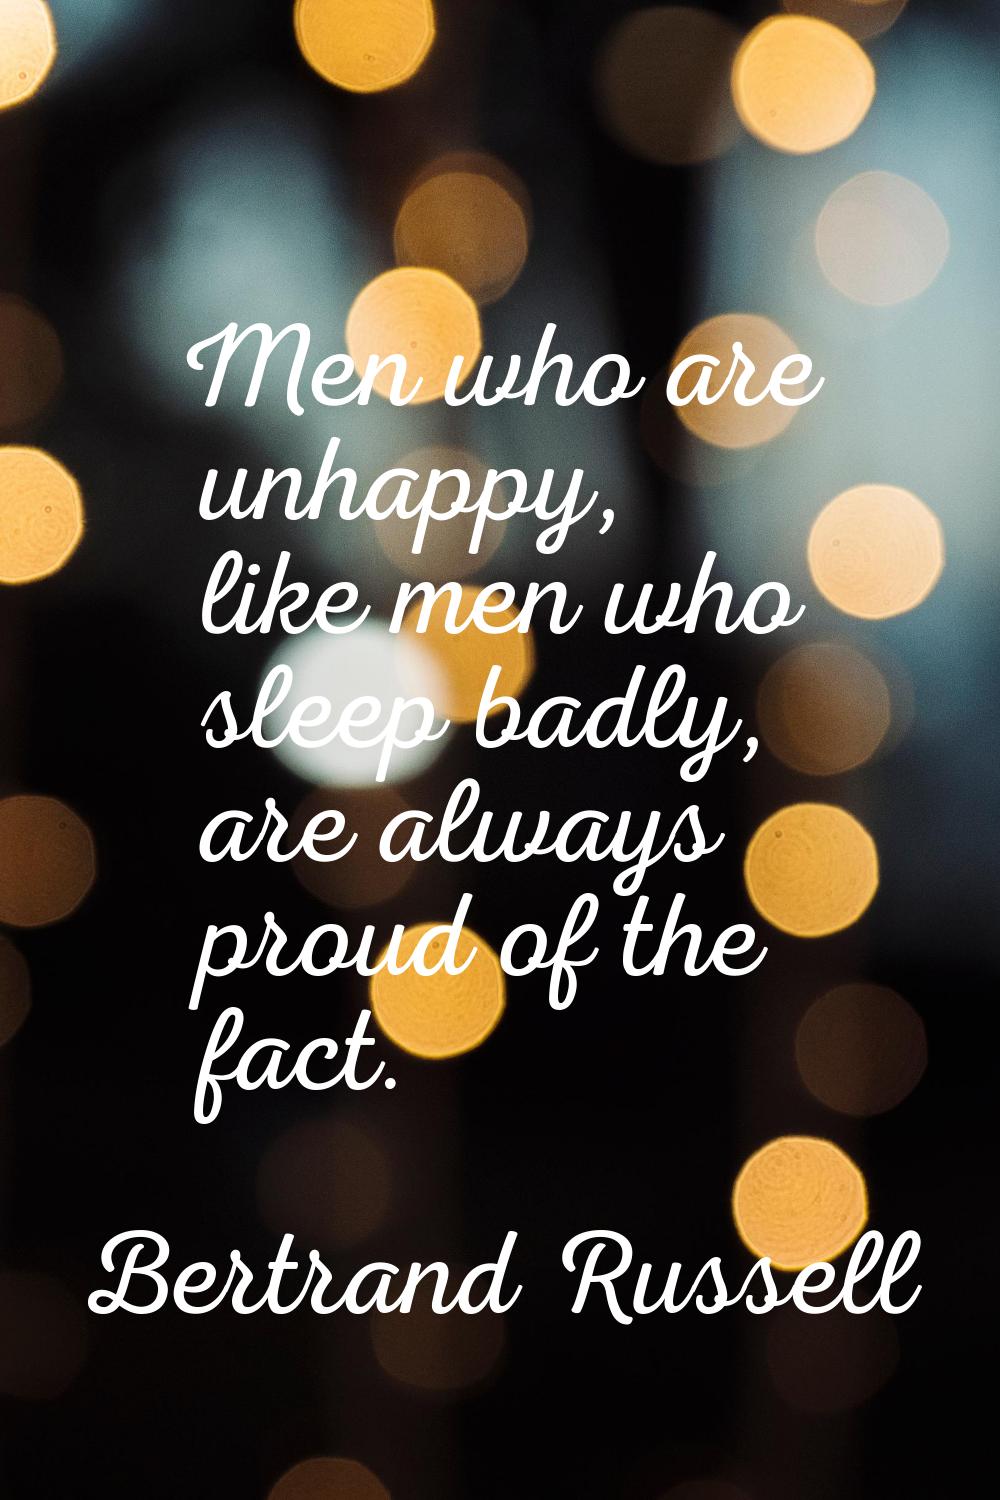 Men who are unhappy, like men who sleep badly, are always proud of the fact.